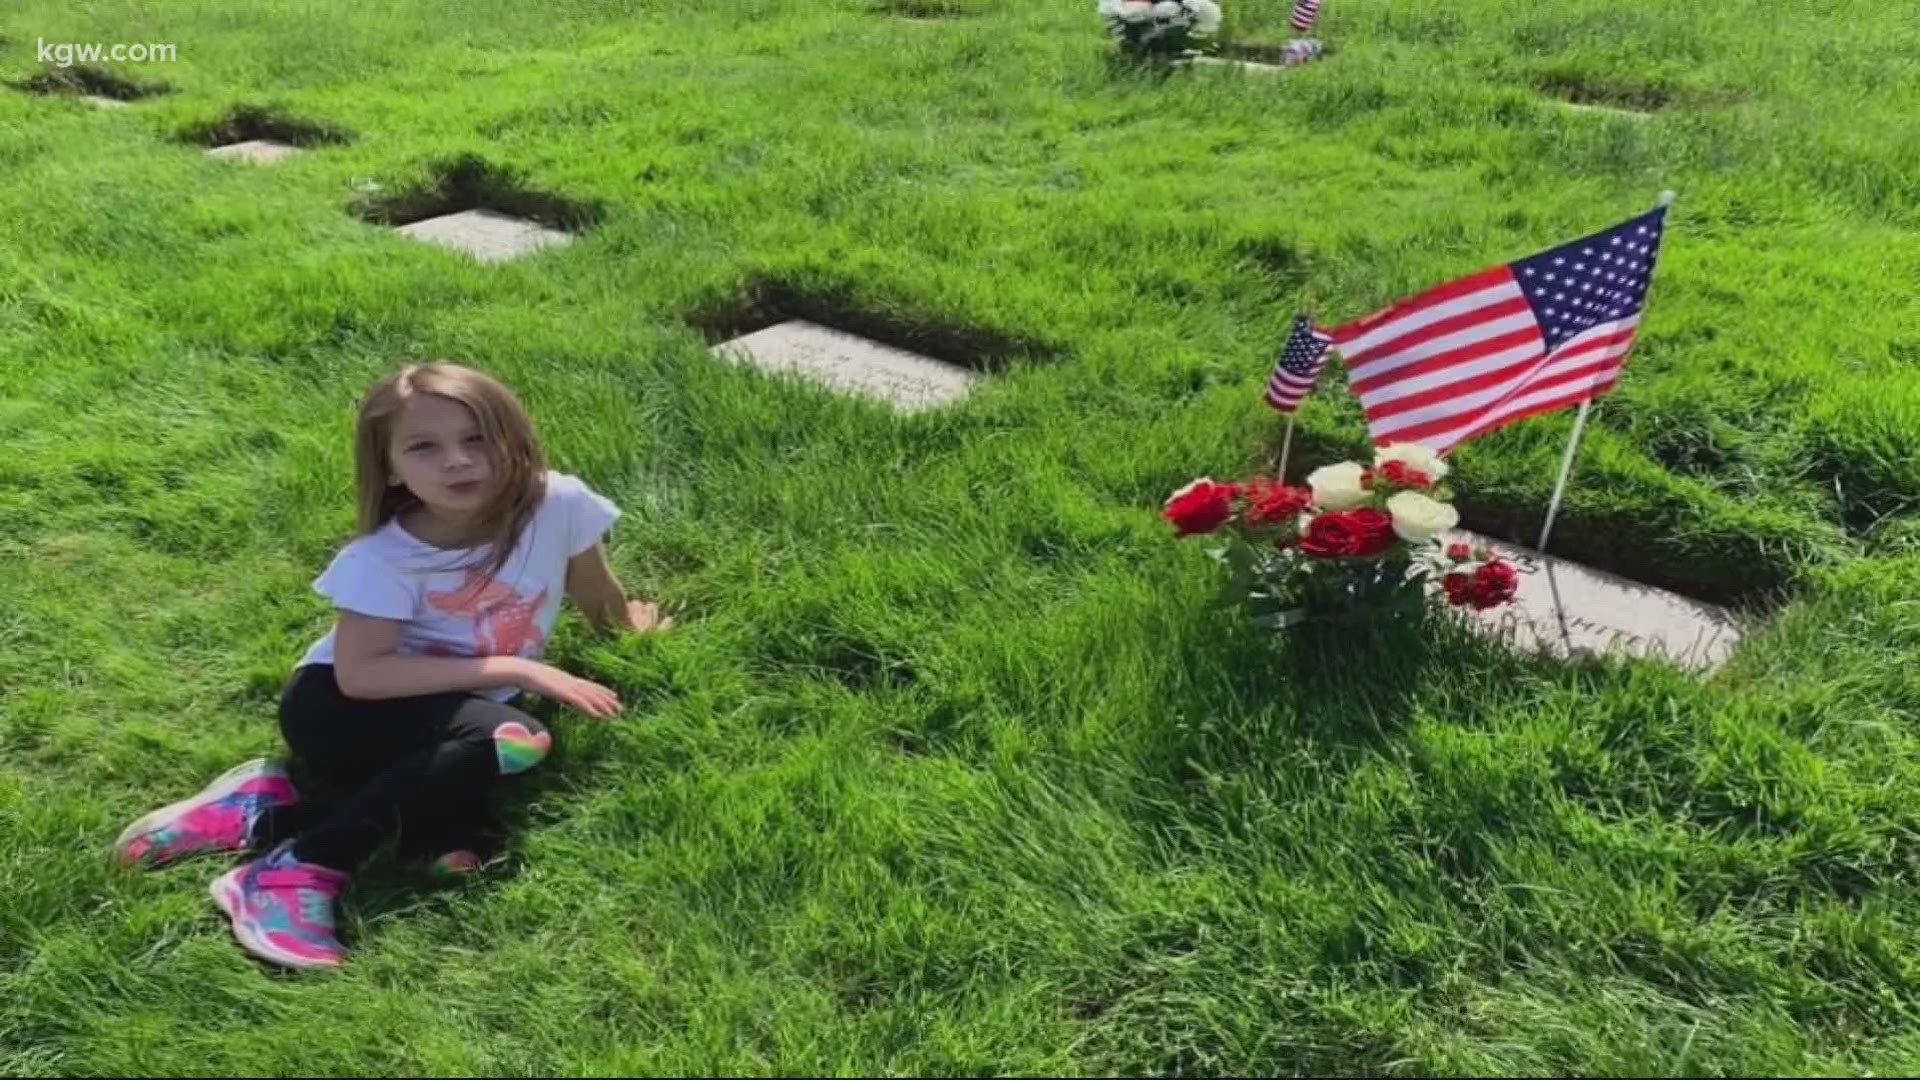 The Stewart family placed nearly 3,000 flags at Willamette National Cemetery in honor of fallen veterans.